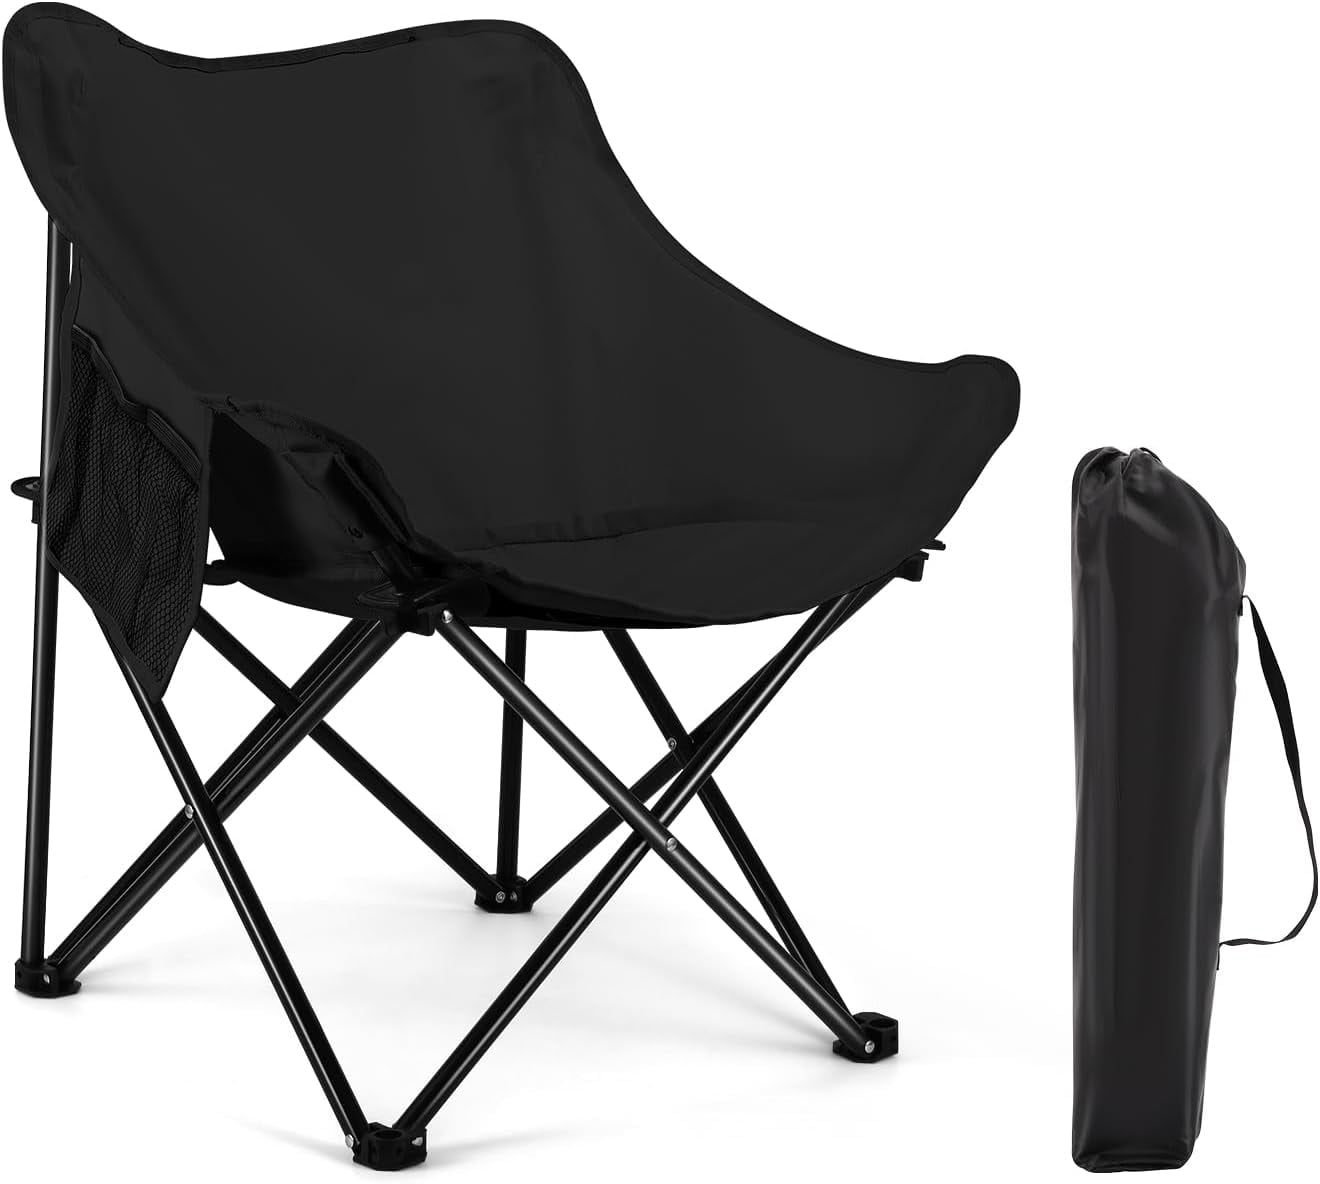 CoPedvic Oversized Camping Chair Heavy Duty Outdoor Lawn Folding Chairs  with Carry Bag Supports 350lbs, Black 